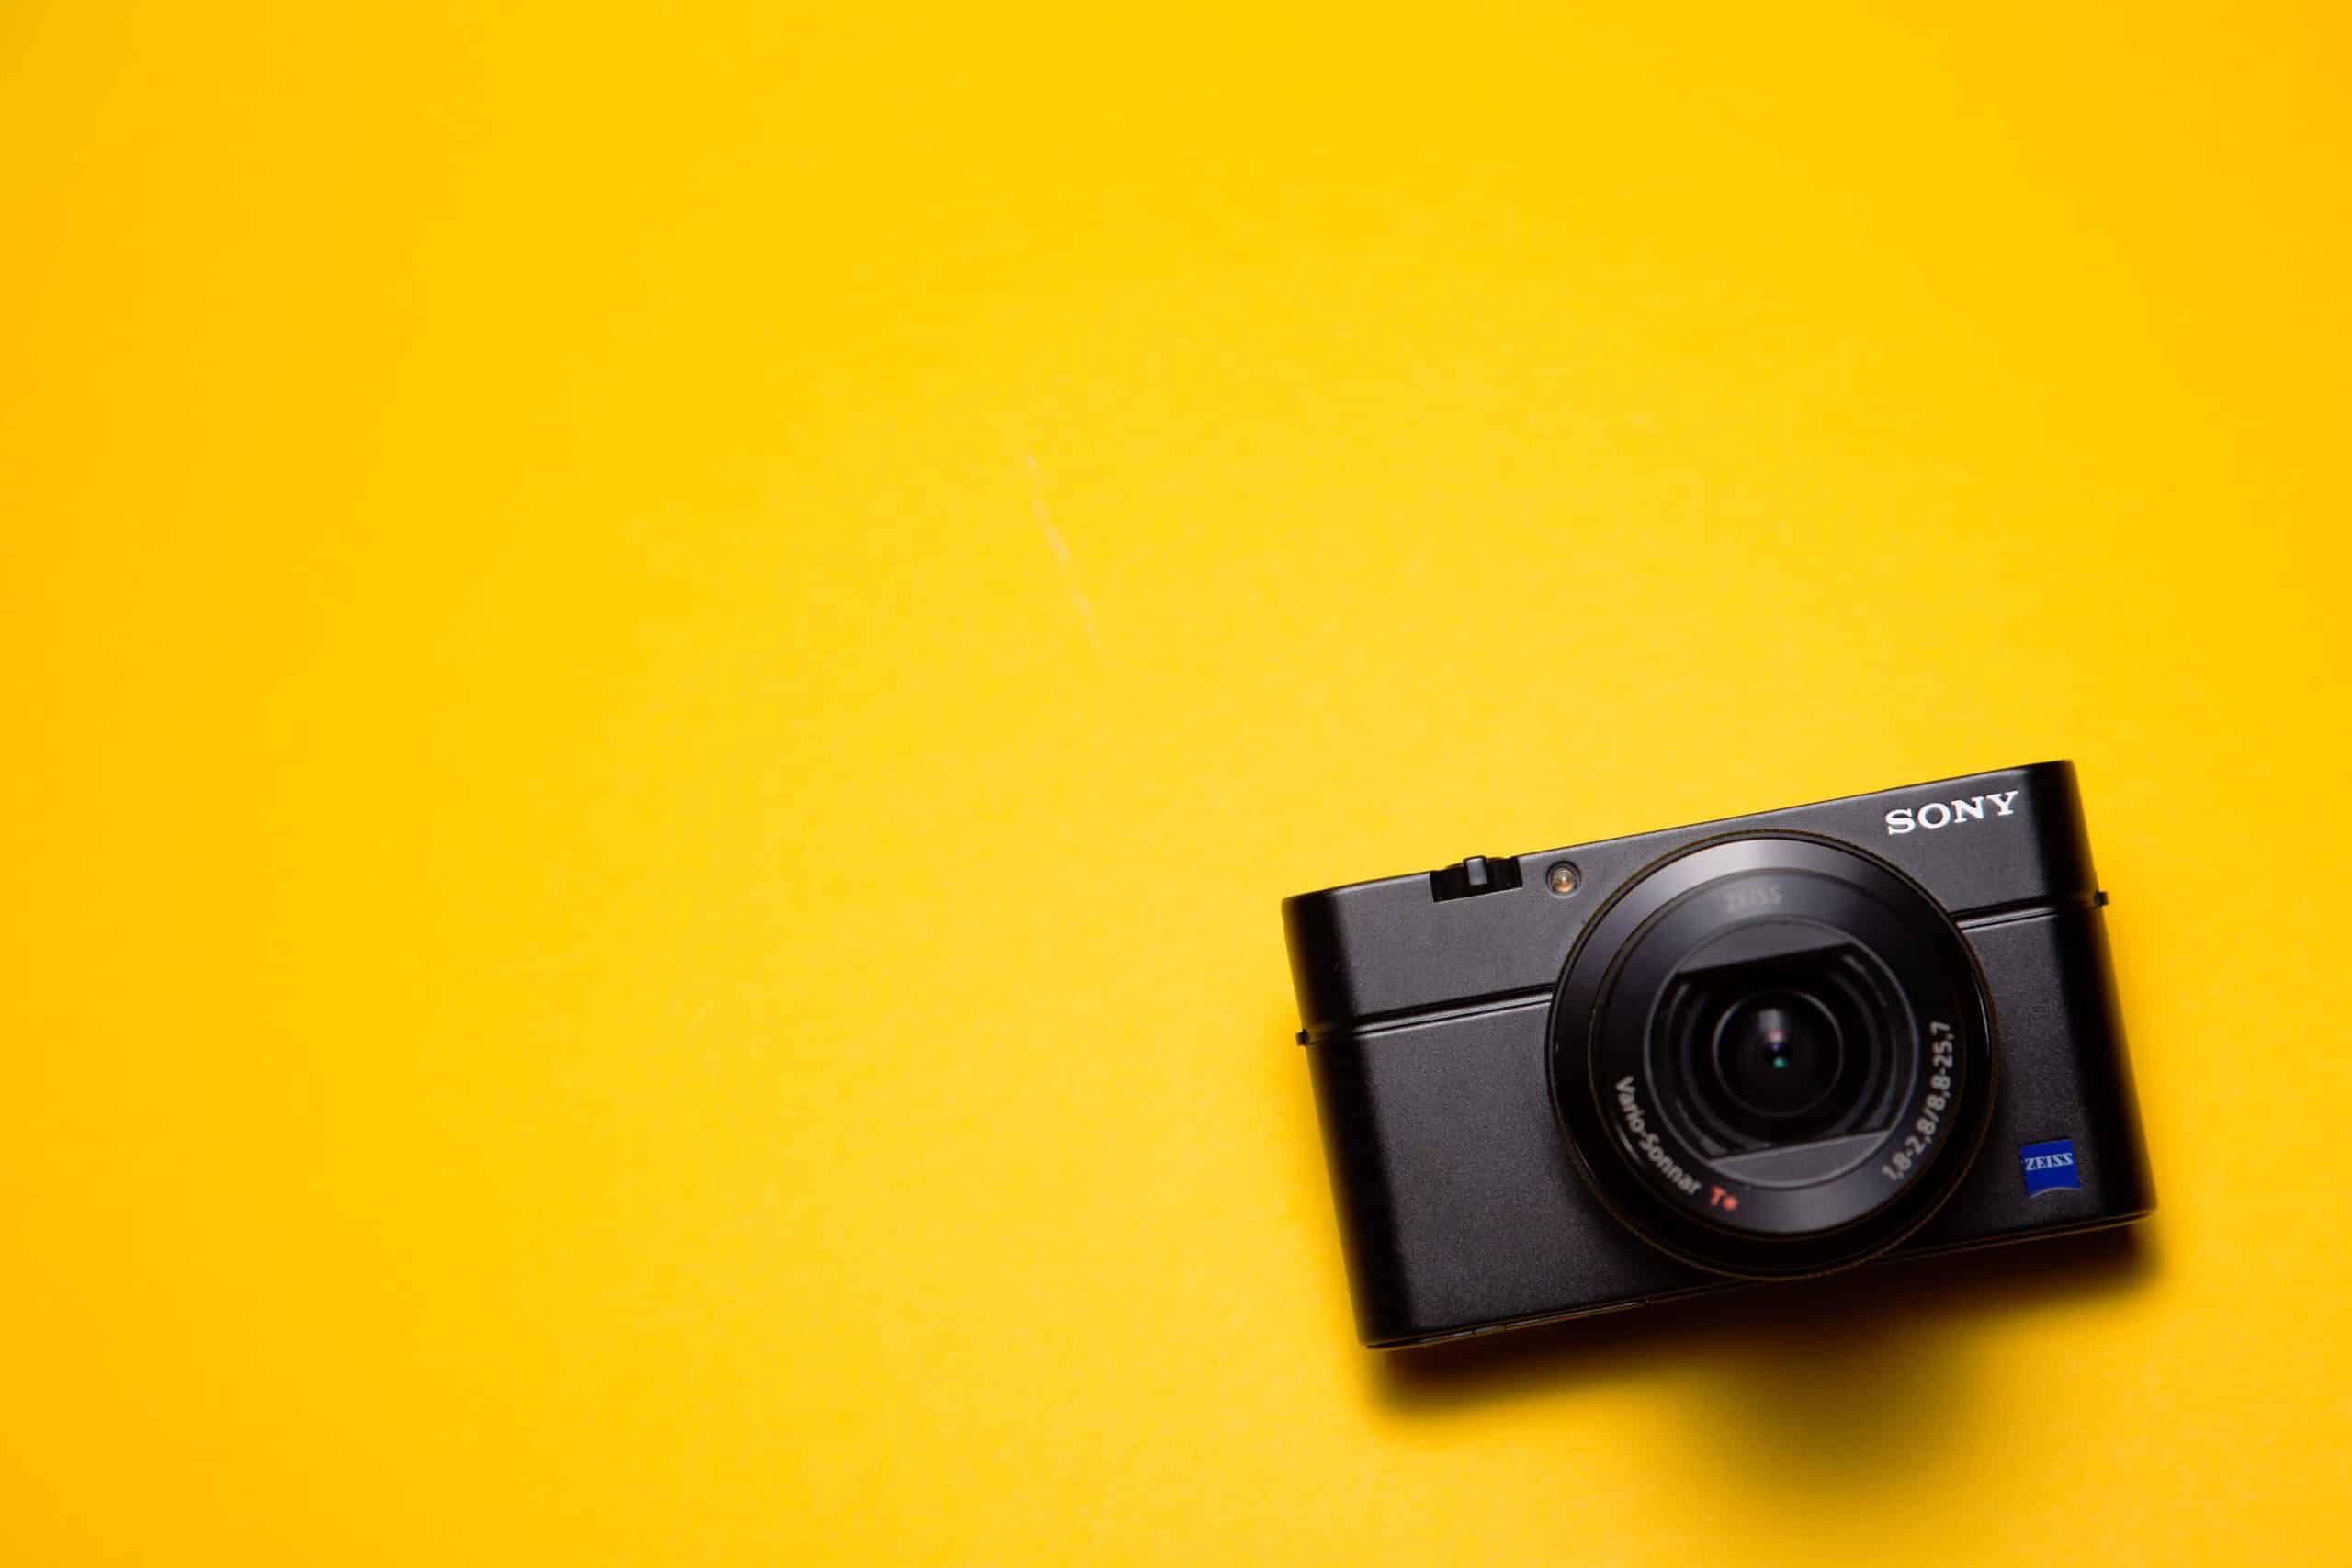 Our Guide To The Best Point-And-Shoot Cameras